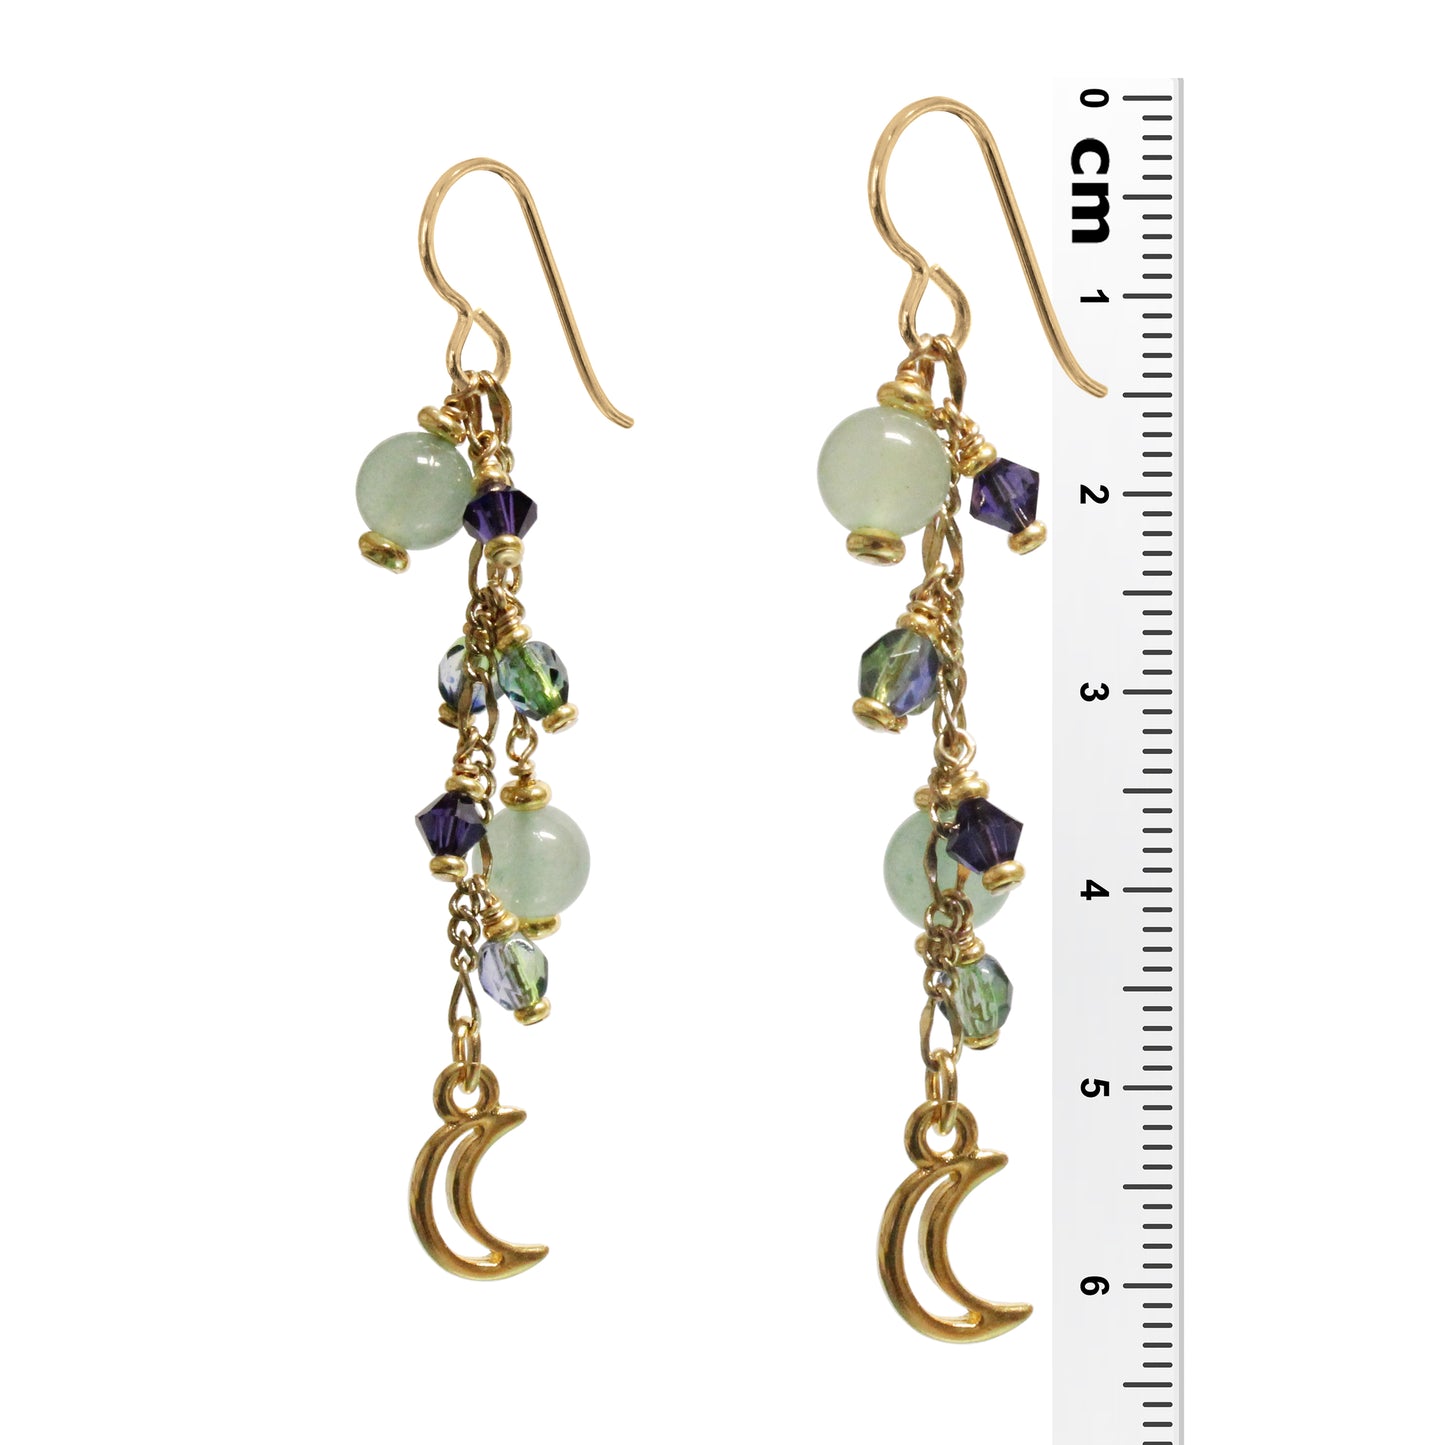 Crescent Moon Earrings / 63mm length / gold filled earwires